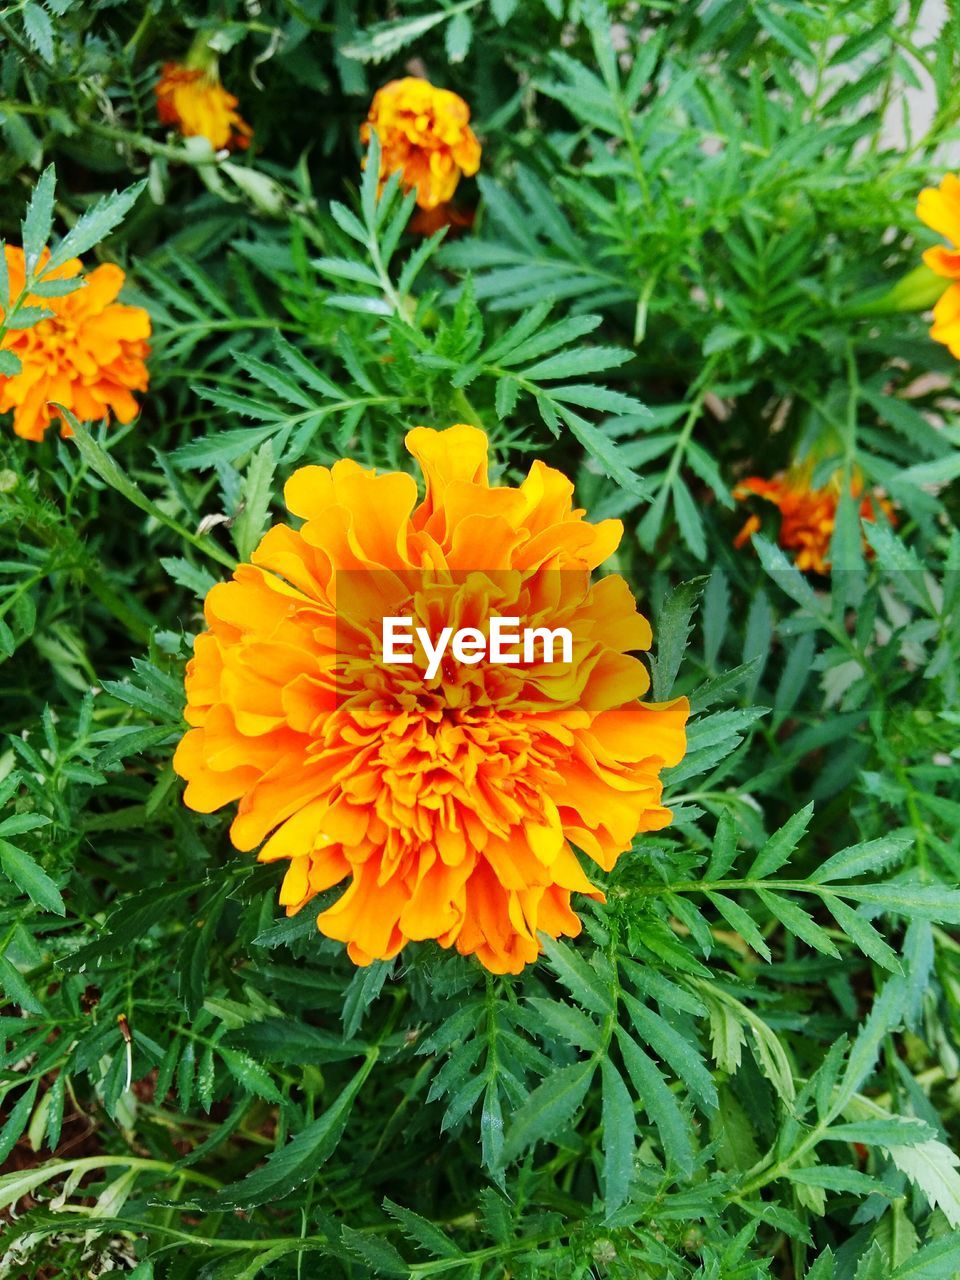 HIGH ANGLE VIEW OF ORANGE MARIGOLD FLOWERS BLOOMING OUTDOORS